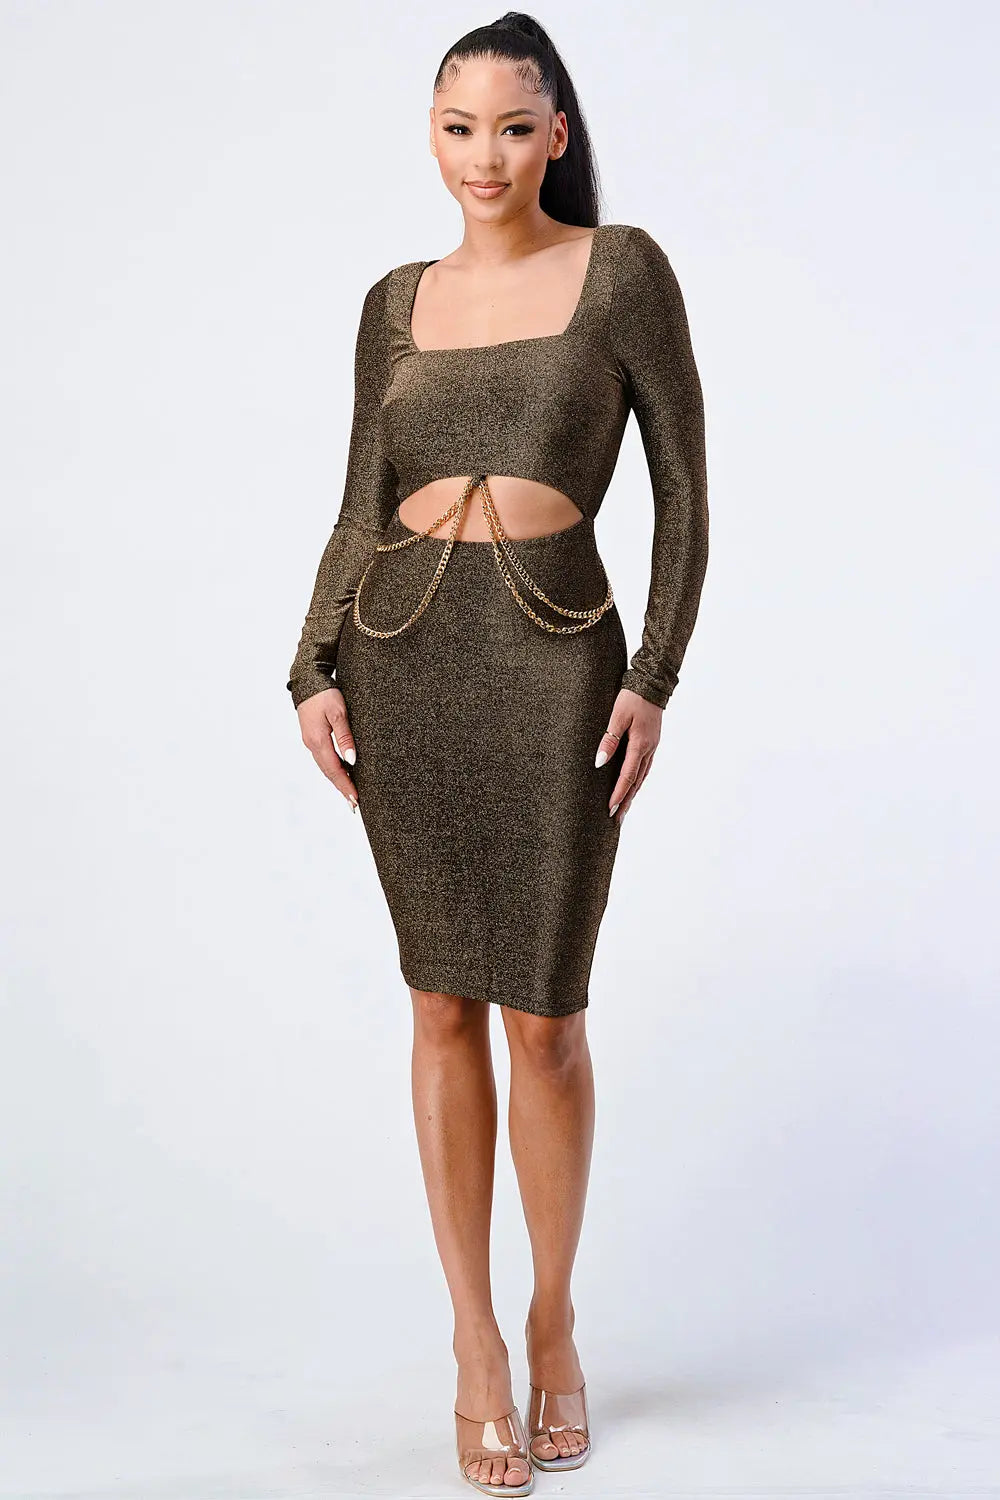 Luxe Waist Gold Chain Cut-out Detail Square Neck Glitter Bodycon Dress Sunny EvE Fashion